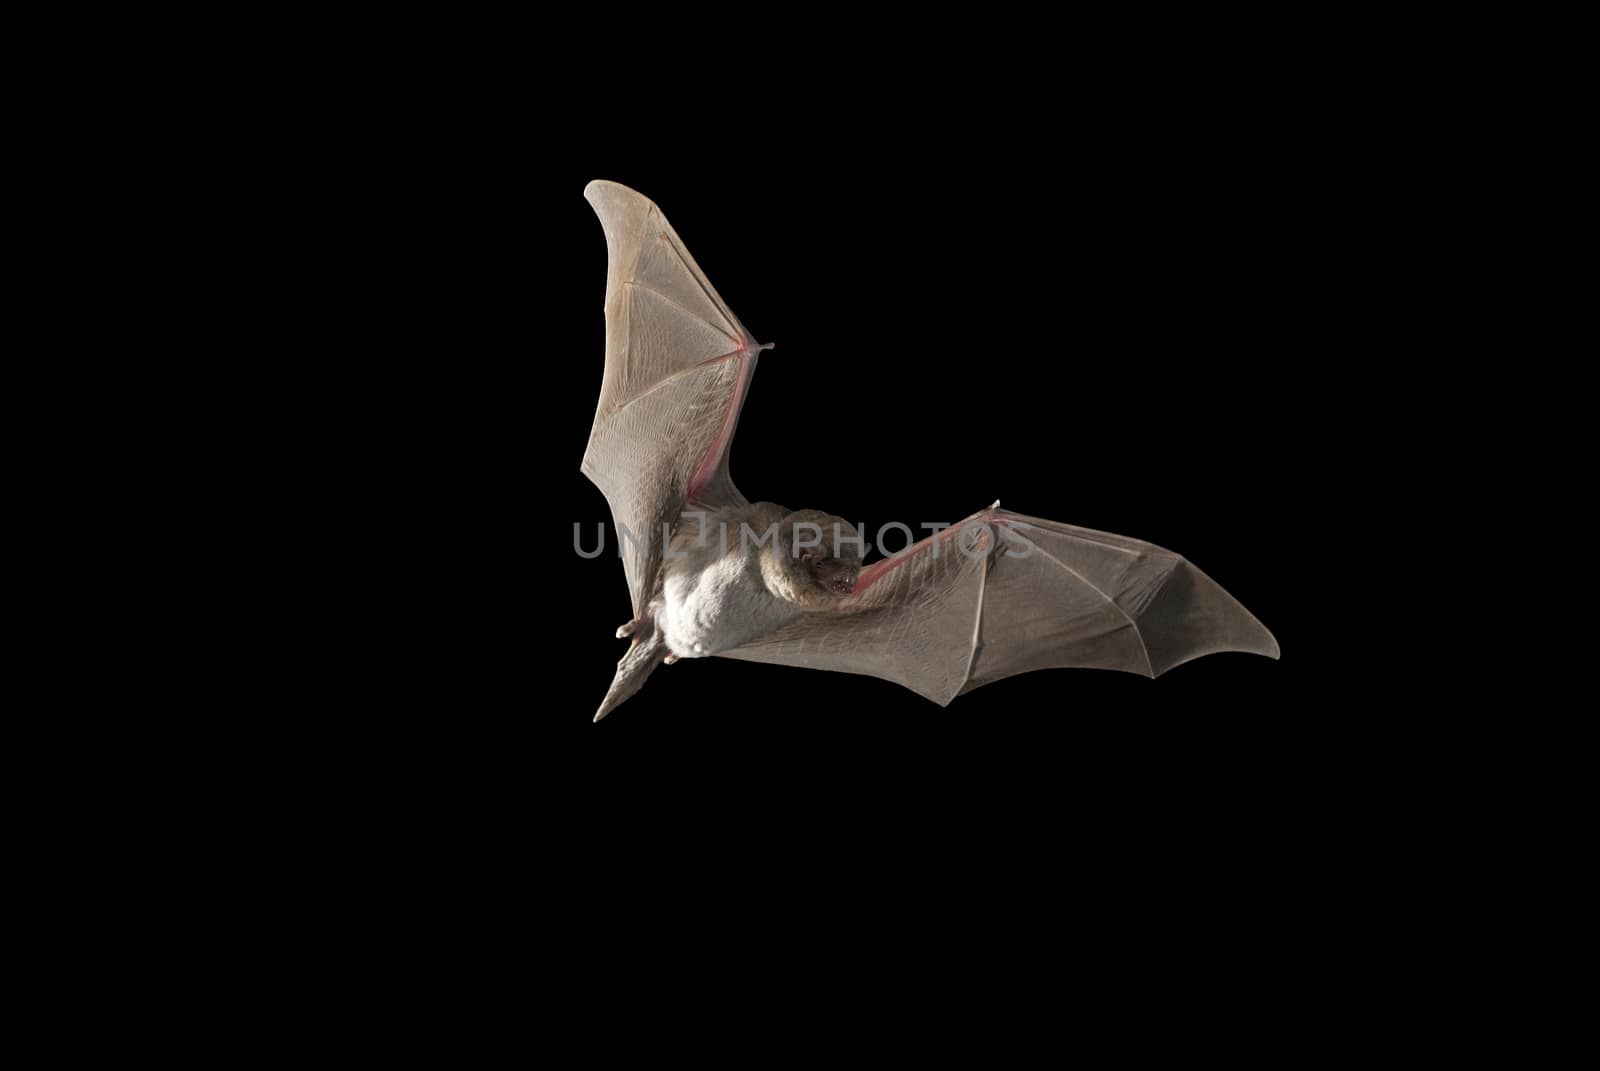 Bat bent common Miniopterus schreibersii, flying in a cave, with black background